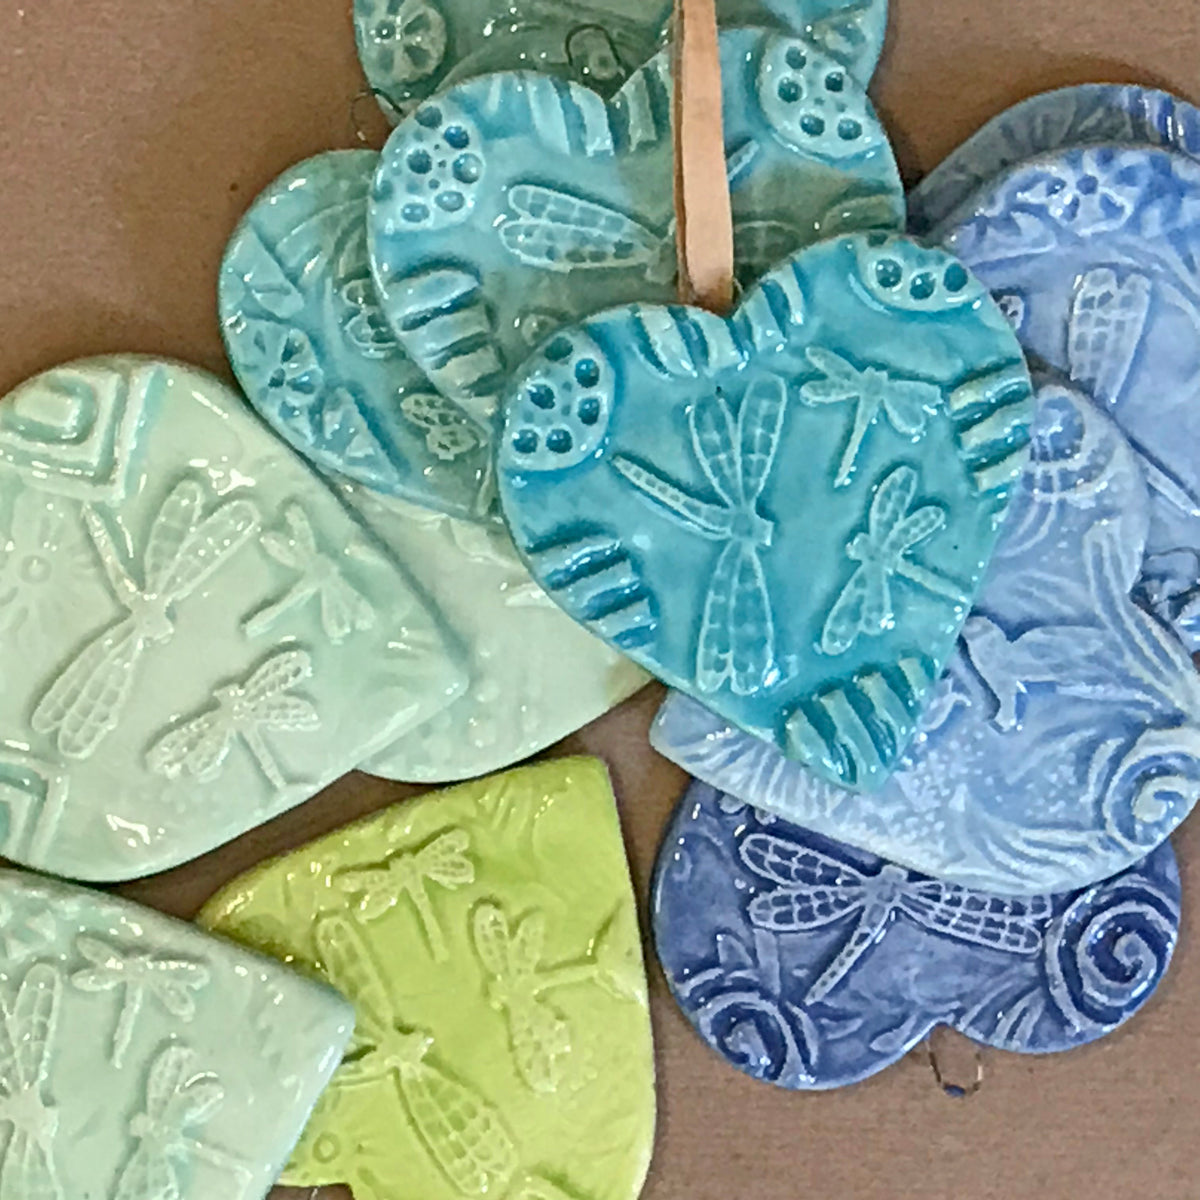 Showing the colors of our dragonfly heart-shaped ornamanets.  